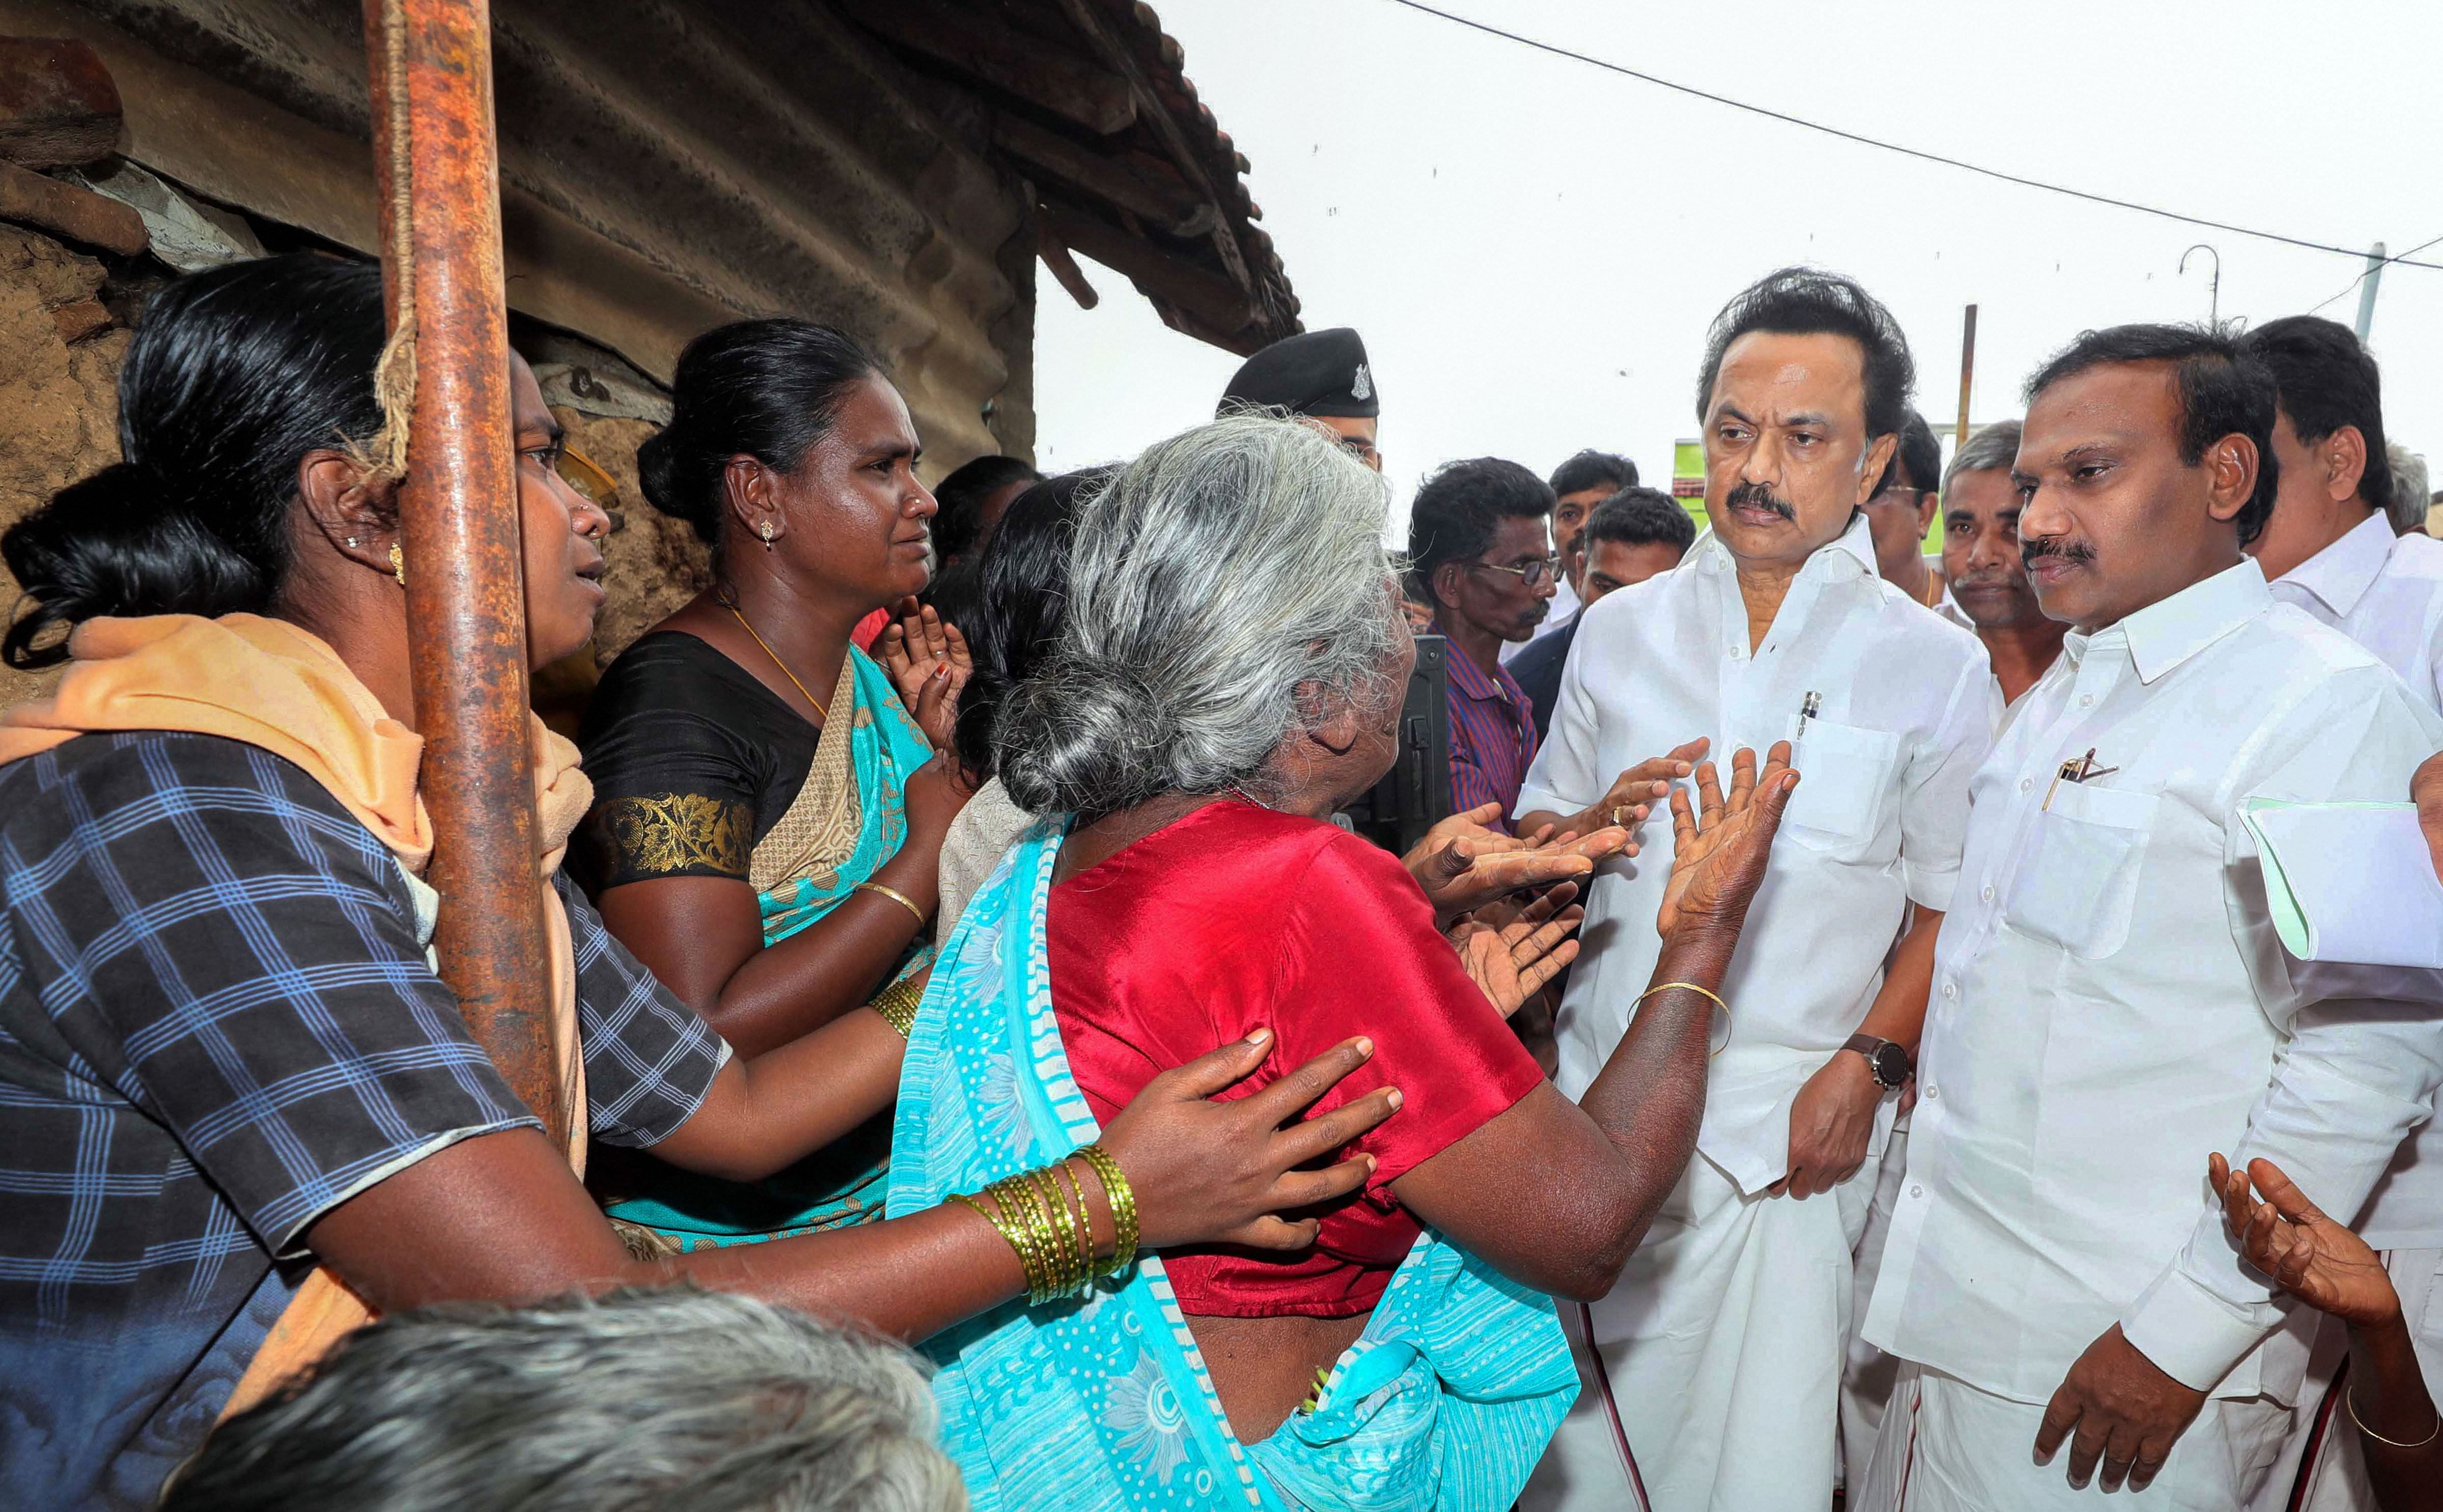 DMK Leader MK Stalin with Nilgiri MP A Raja consoles people at the site of the wall collapse in Nadur village of Mettupalayam taluk, near Coimbatore, Tuesday, Dec. 3, 2019. 17 people were killed in the incident after the compound wall of three tile roofed houses collapsed on them. (PTI Photo)